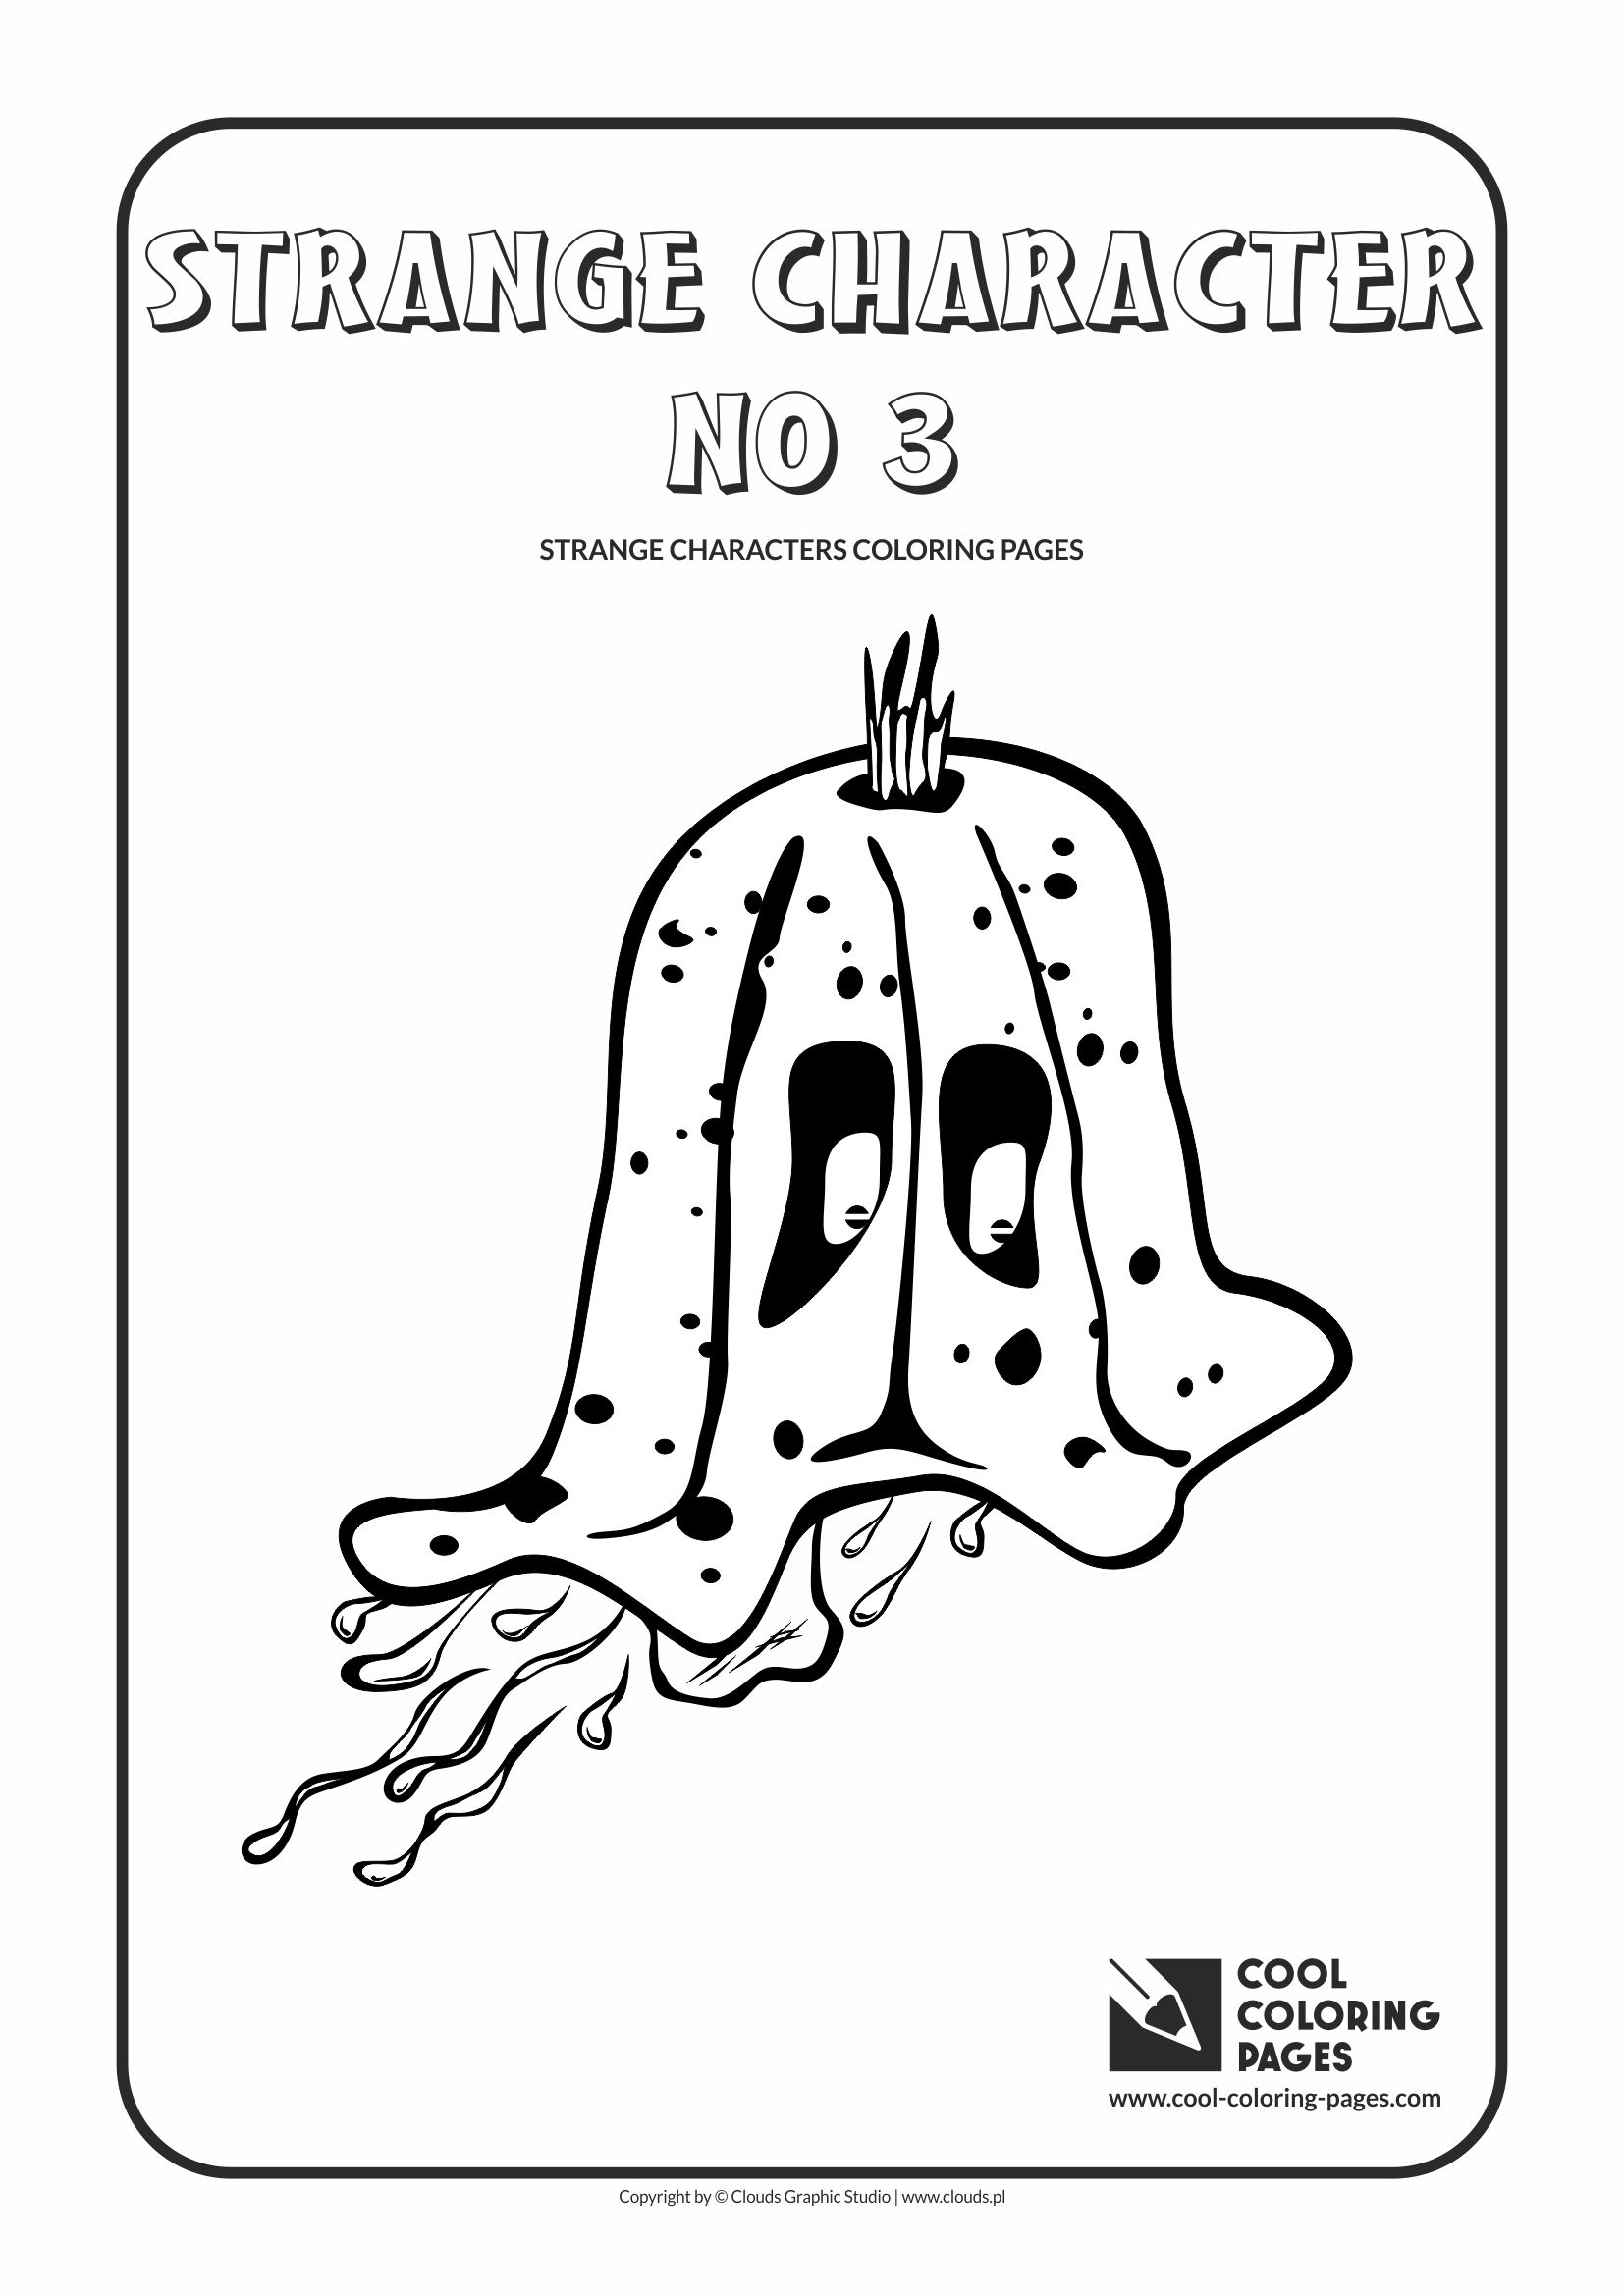 Cool Coloring Pages - Others / Strange character no 3 / Coloring page with strange character no 3